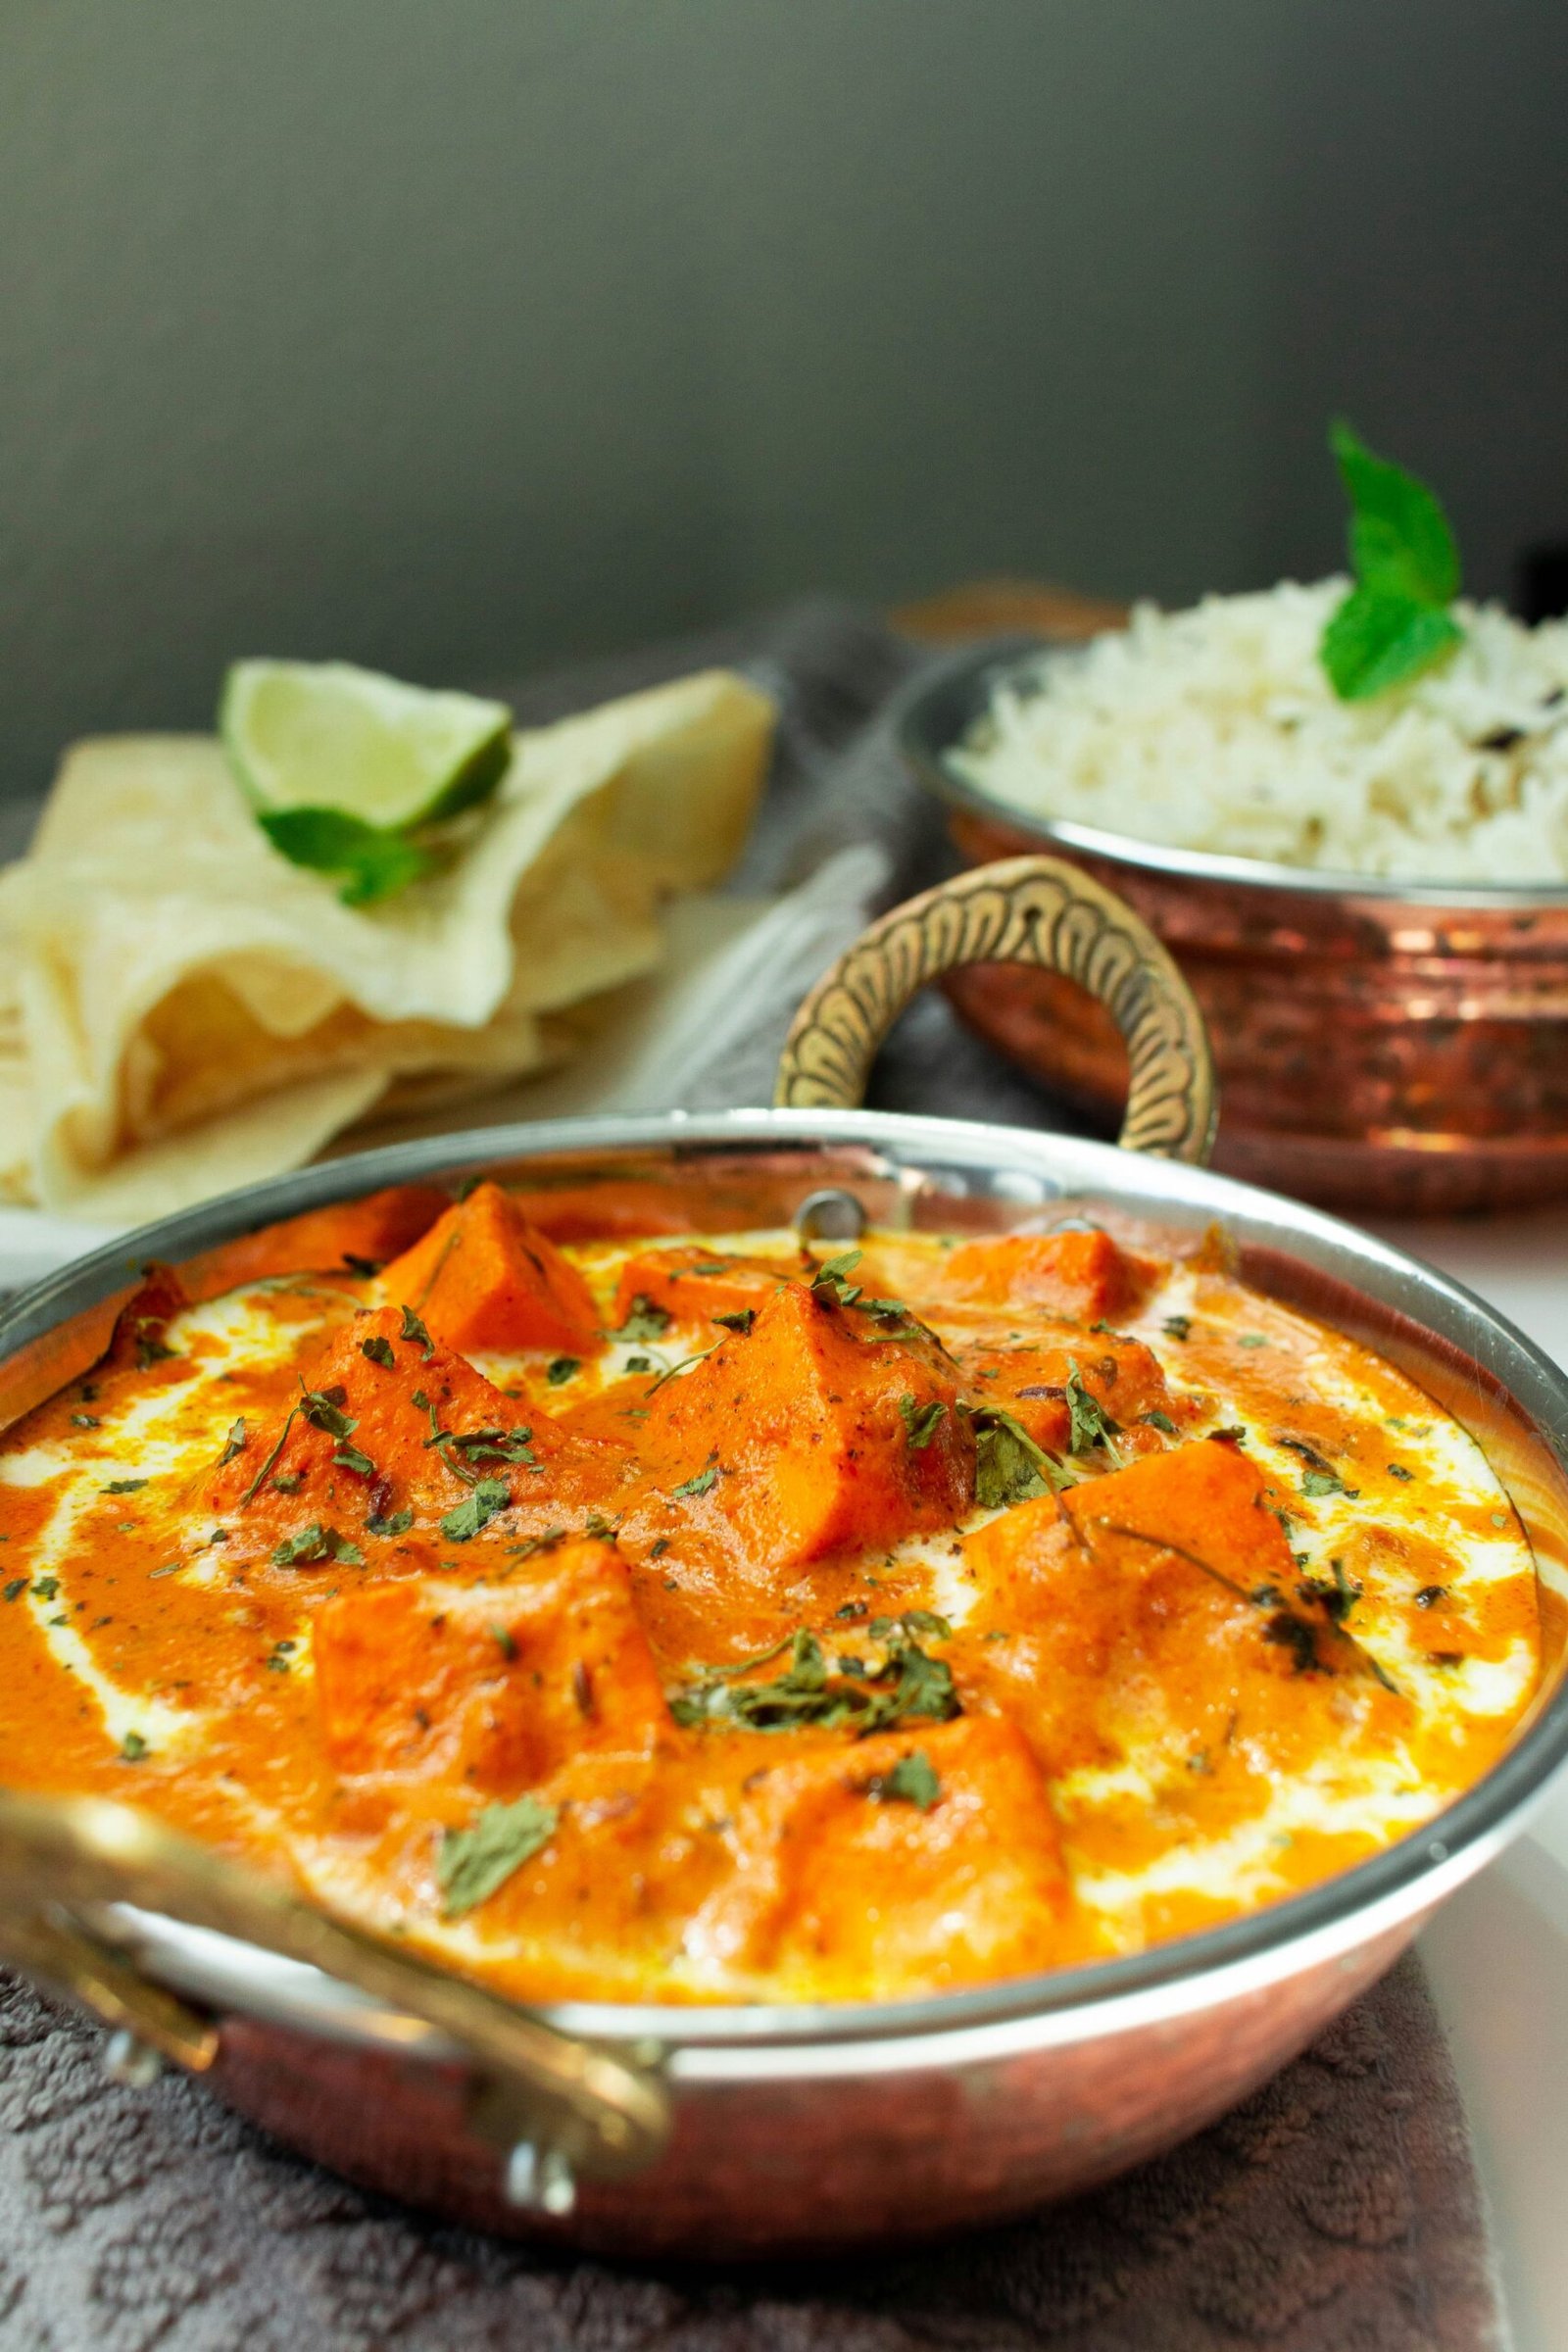 “Cheese Butter Spice Recipe: Paneer in Buttery Tomato Gravy”